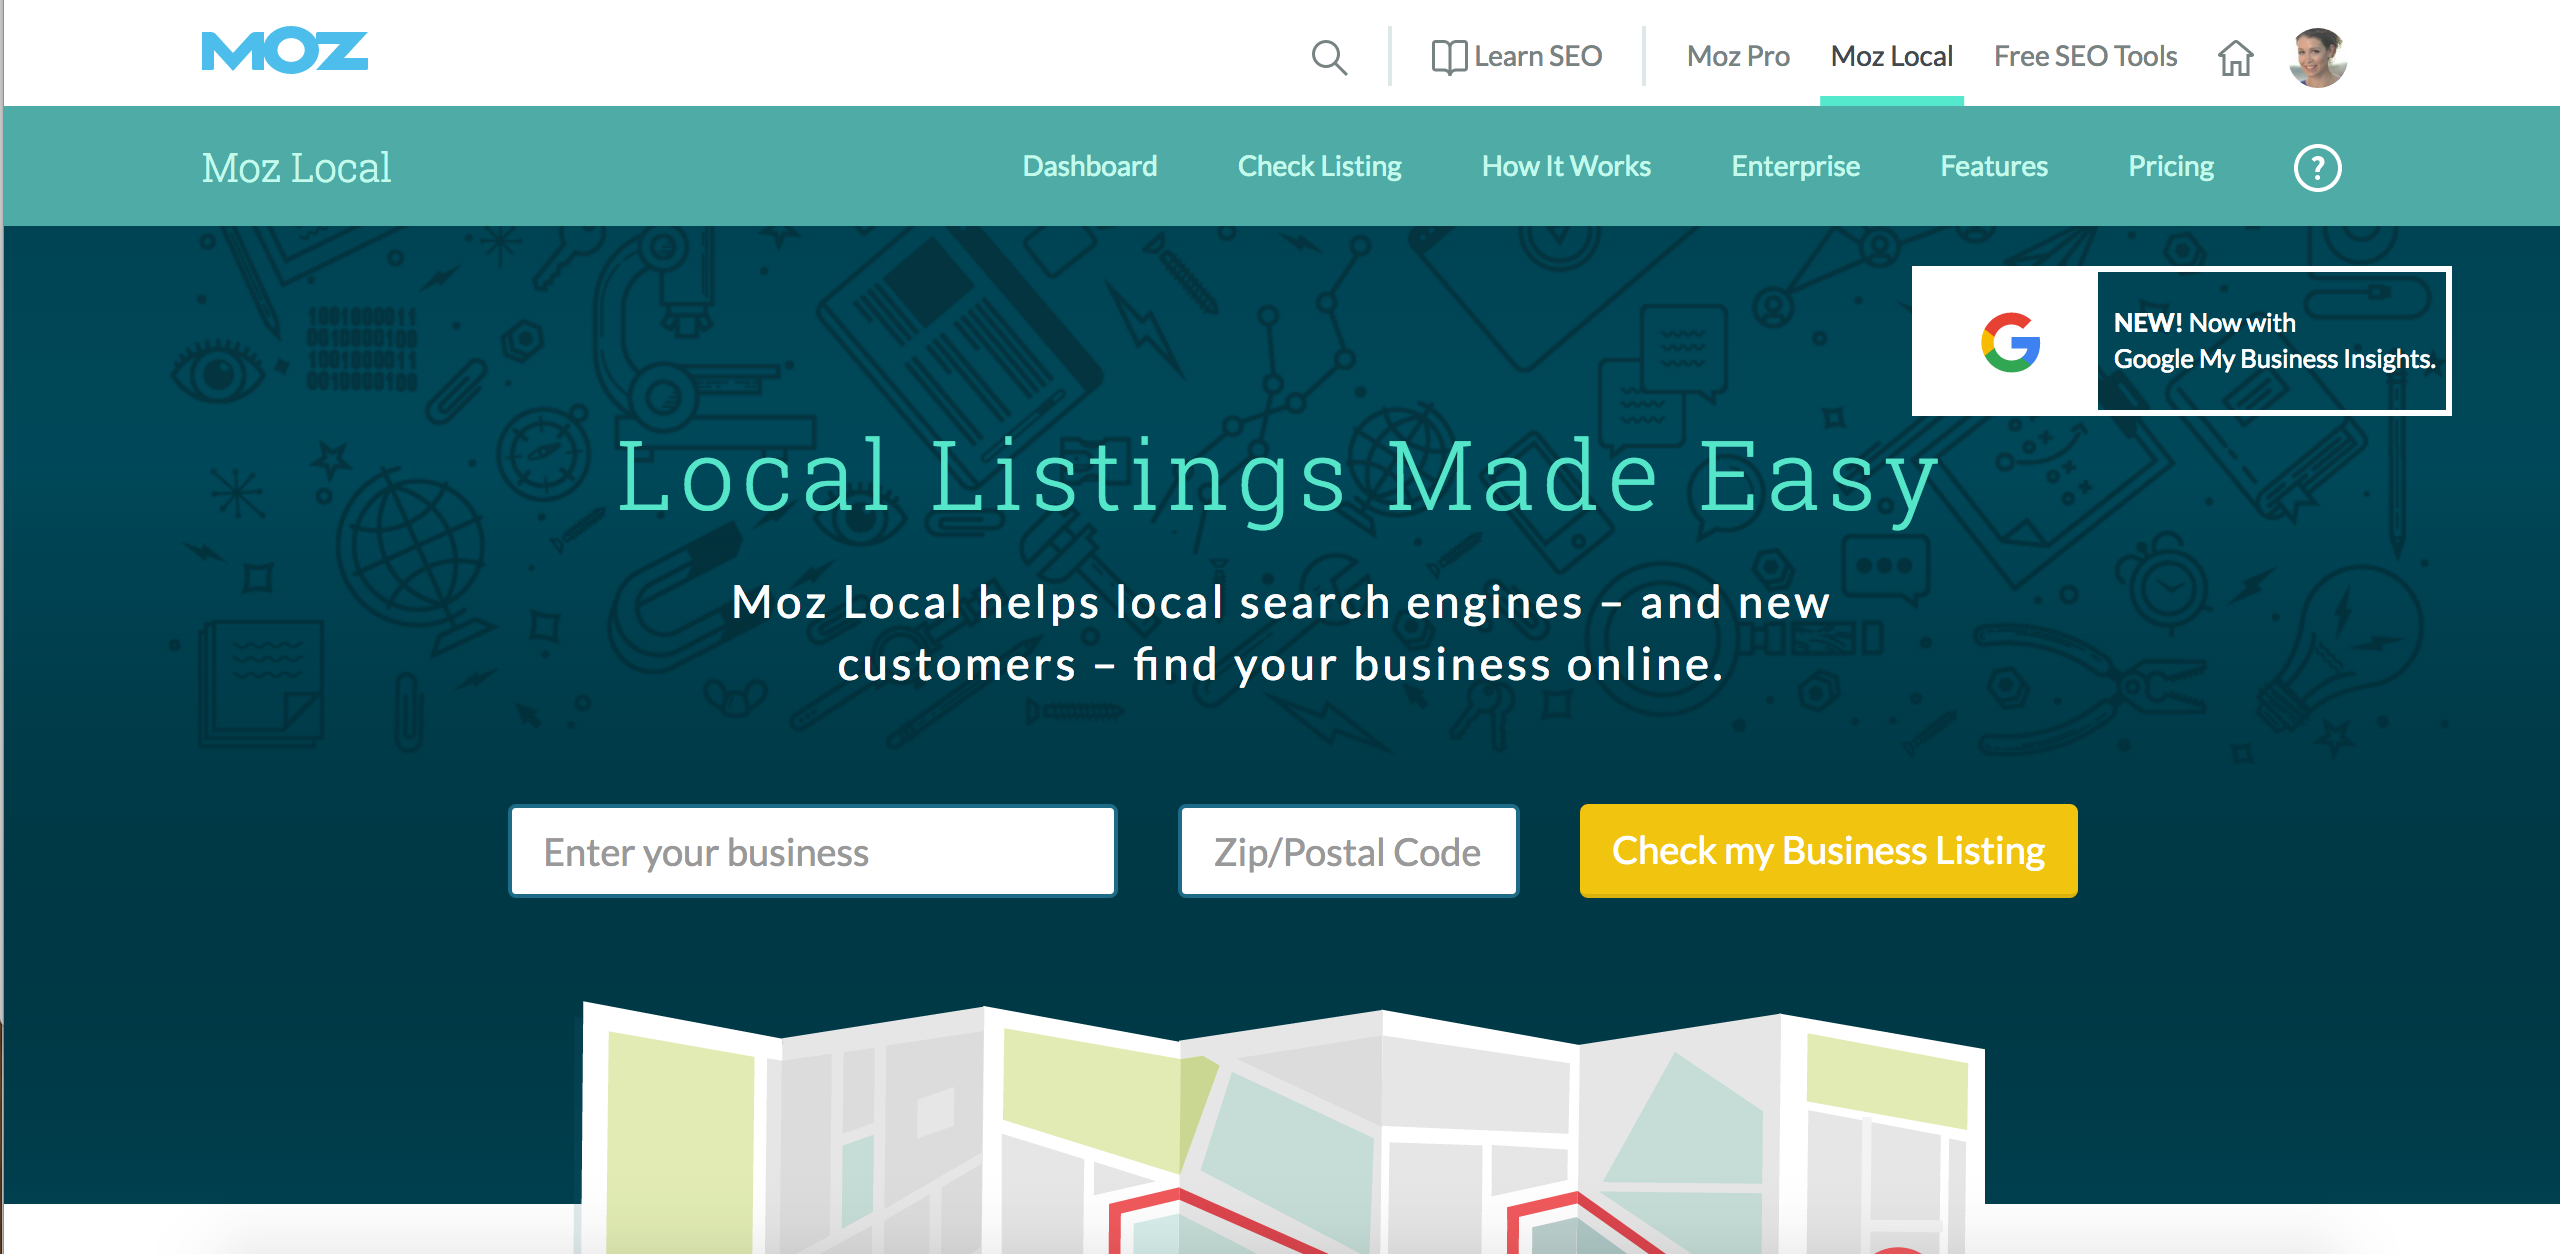 Moz's MozLocal product